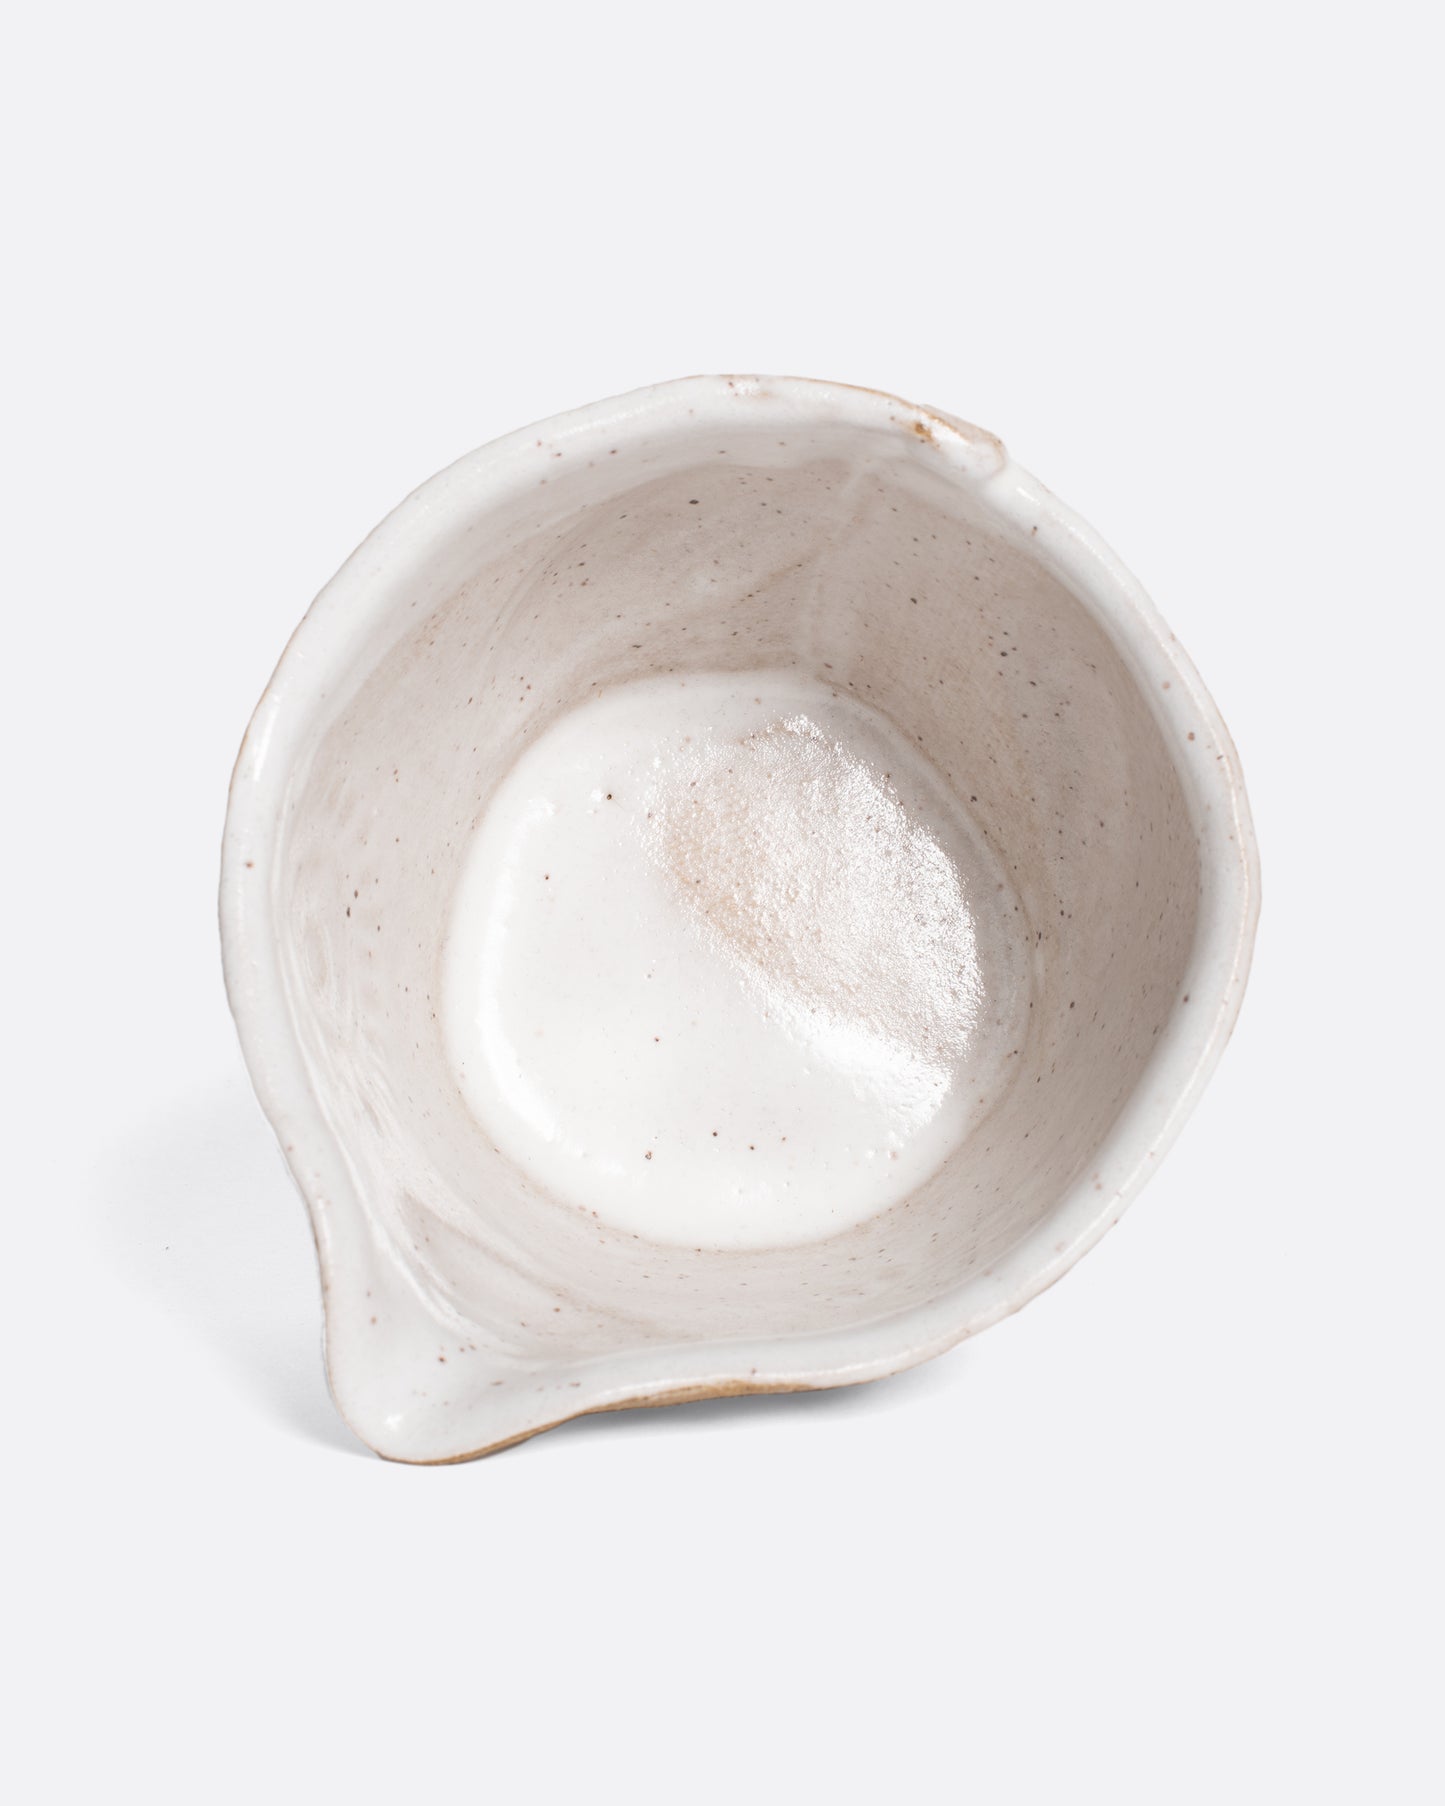 A handmade ceramic bird bowl whose beak serves as a spout, perfect for mixing and serving your favorite salad dressing.